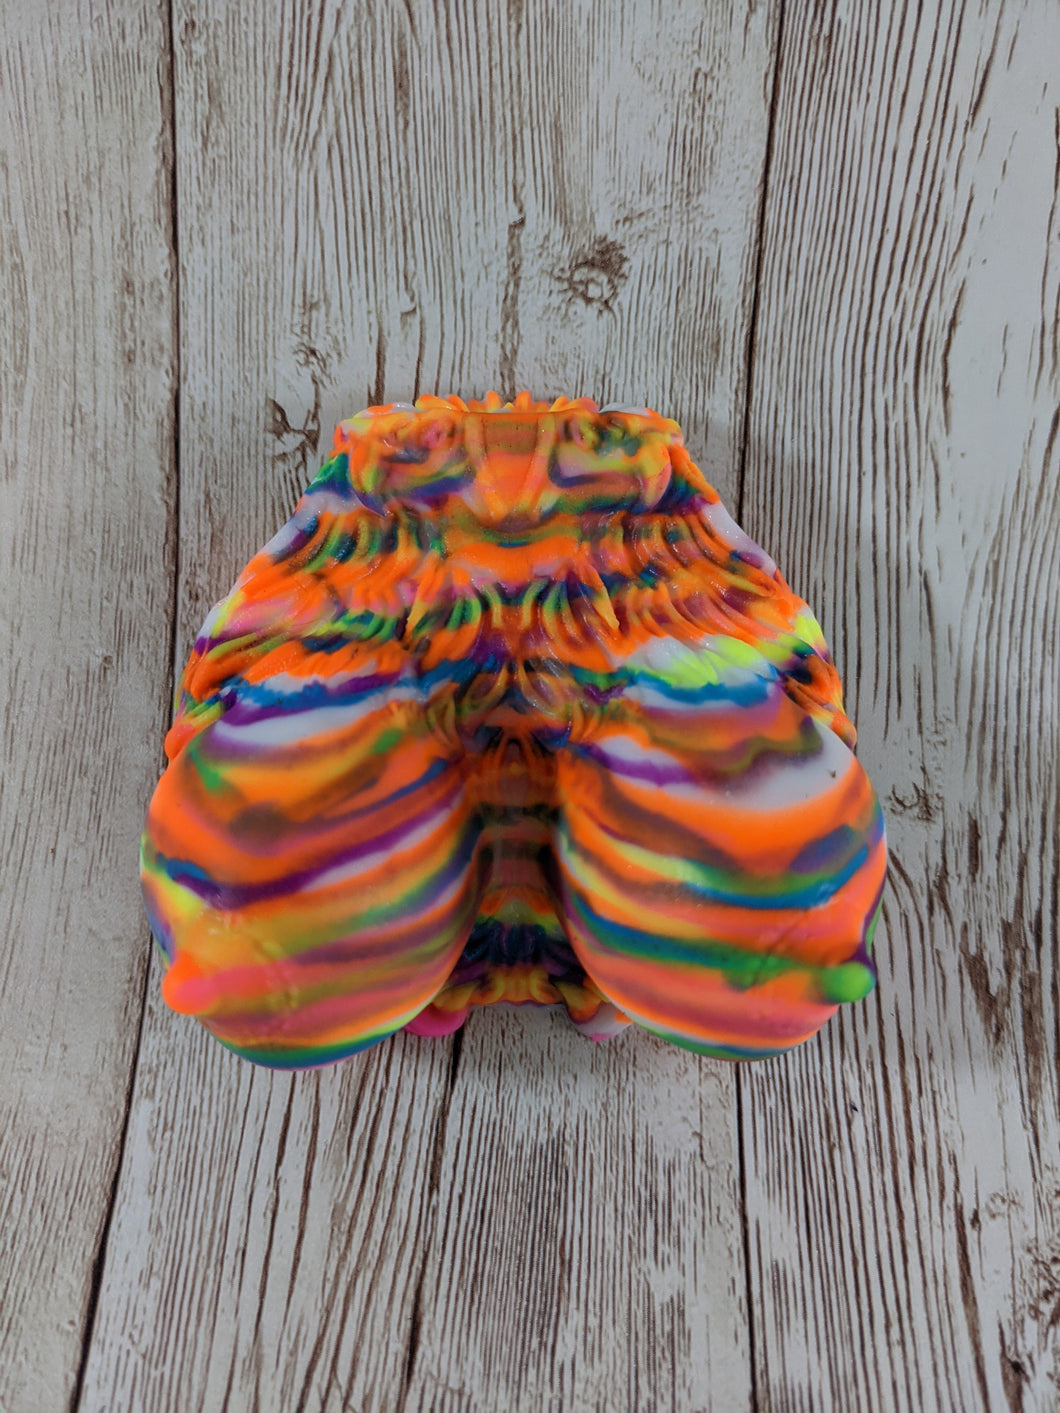 Stella the Moonwalker's Chest, Size Mini (Soft Firmness) Rainbow Birthday Cake Special Coloration